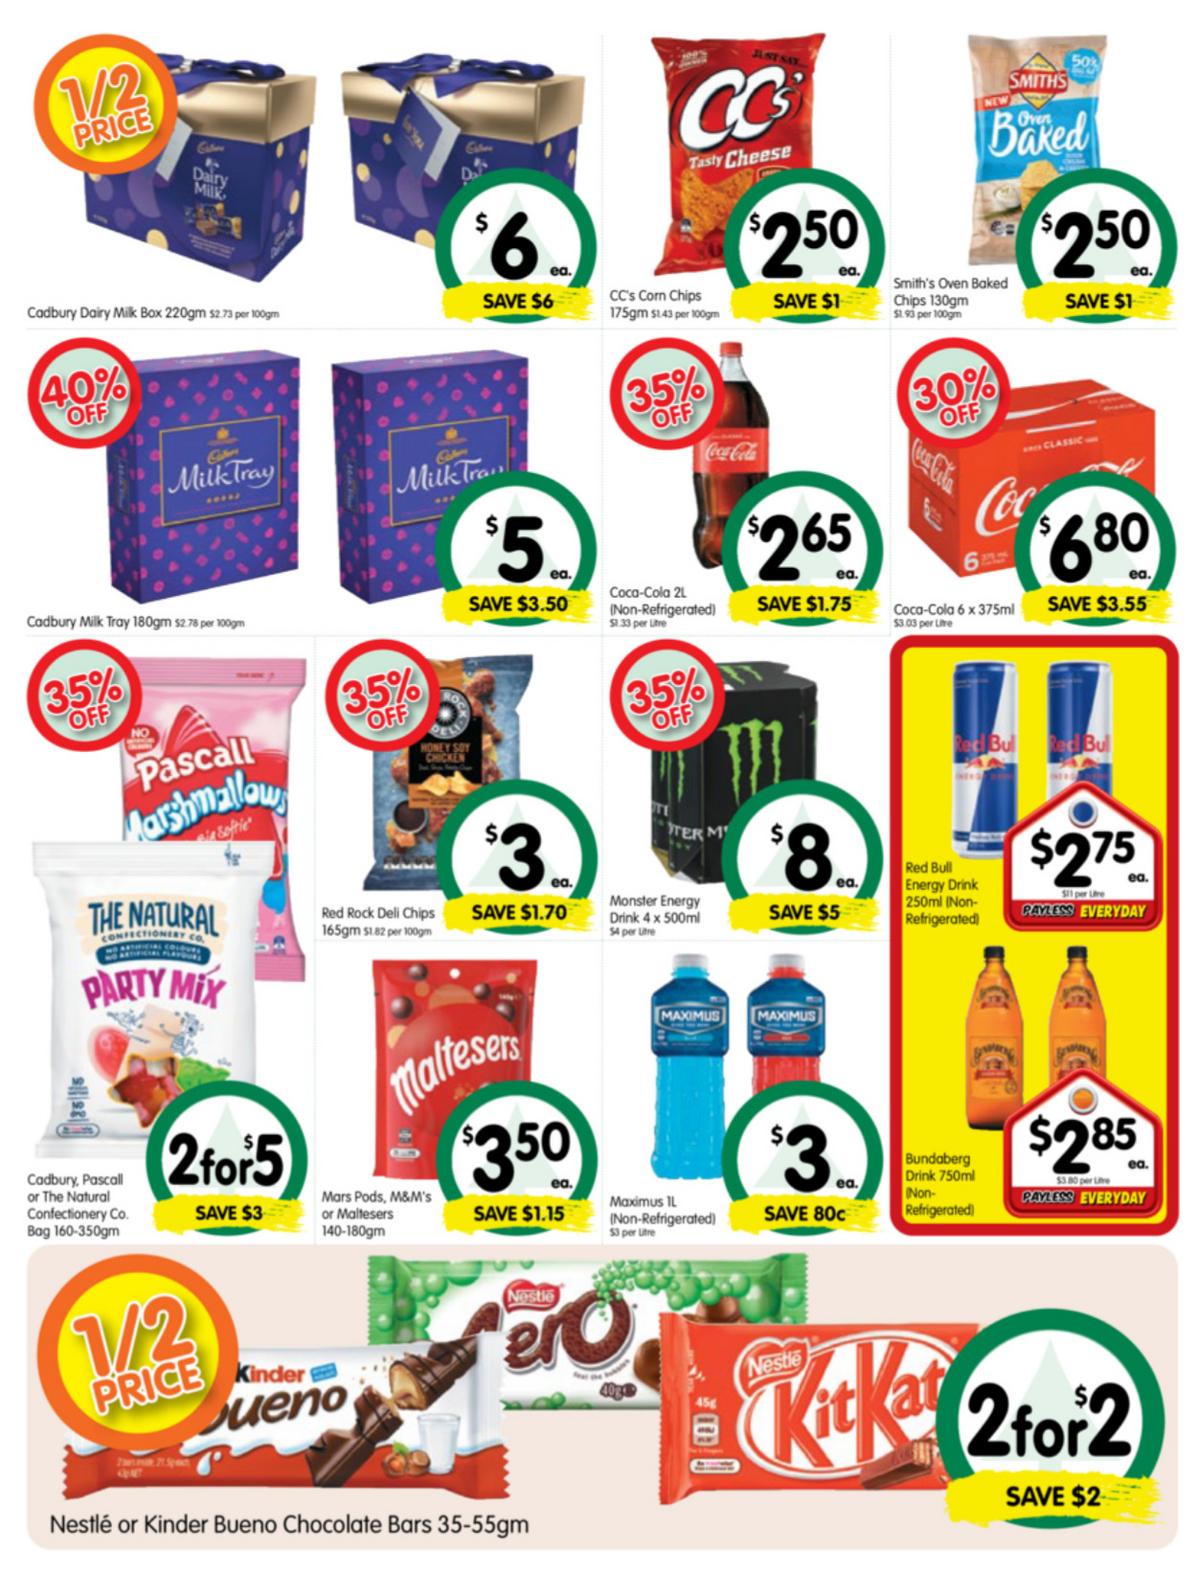 Spar Catalogues from 25 November